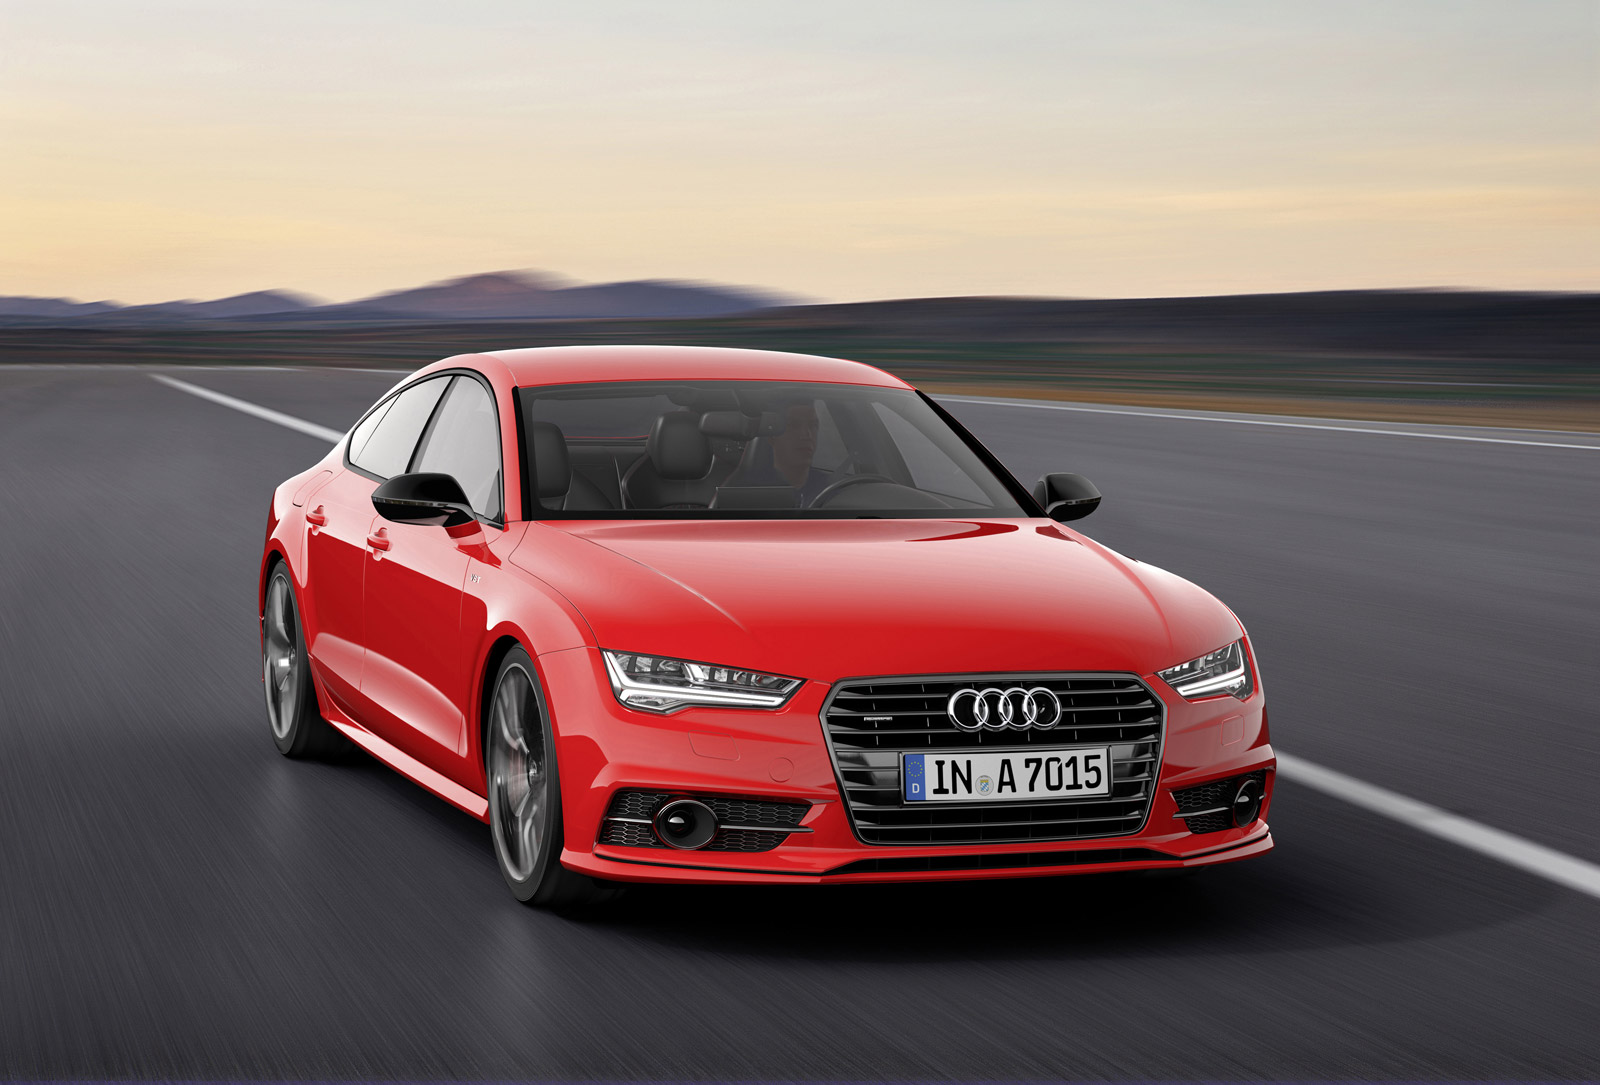 2014 Audi A7 Review, Ratings, Specs, Prices, and Photos - The Car Connection